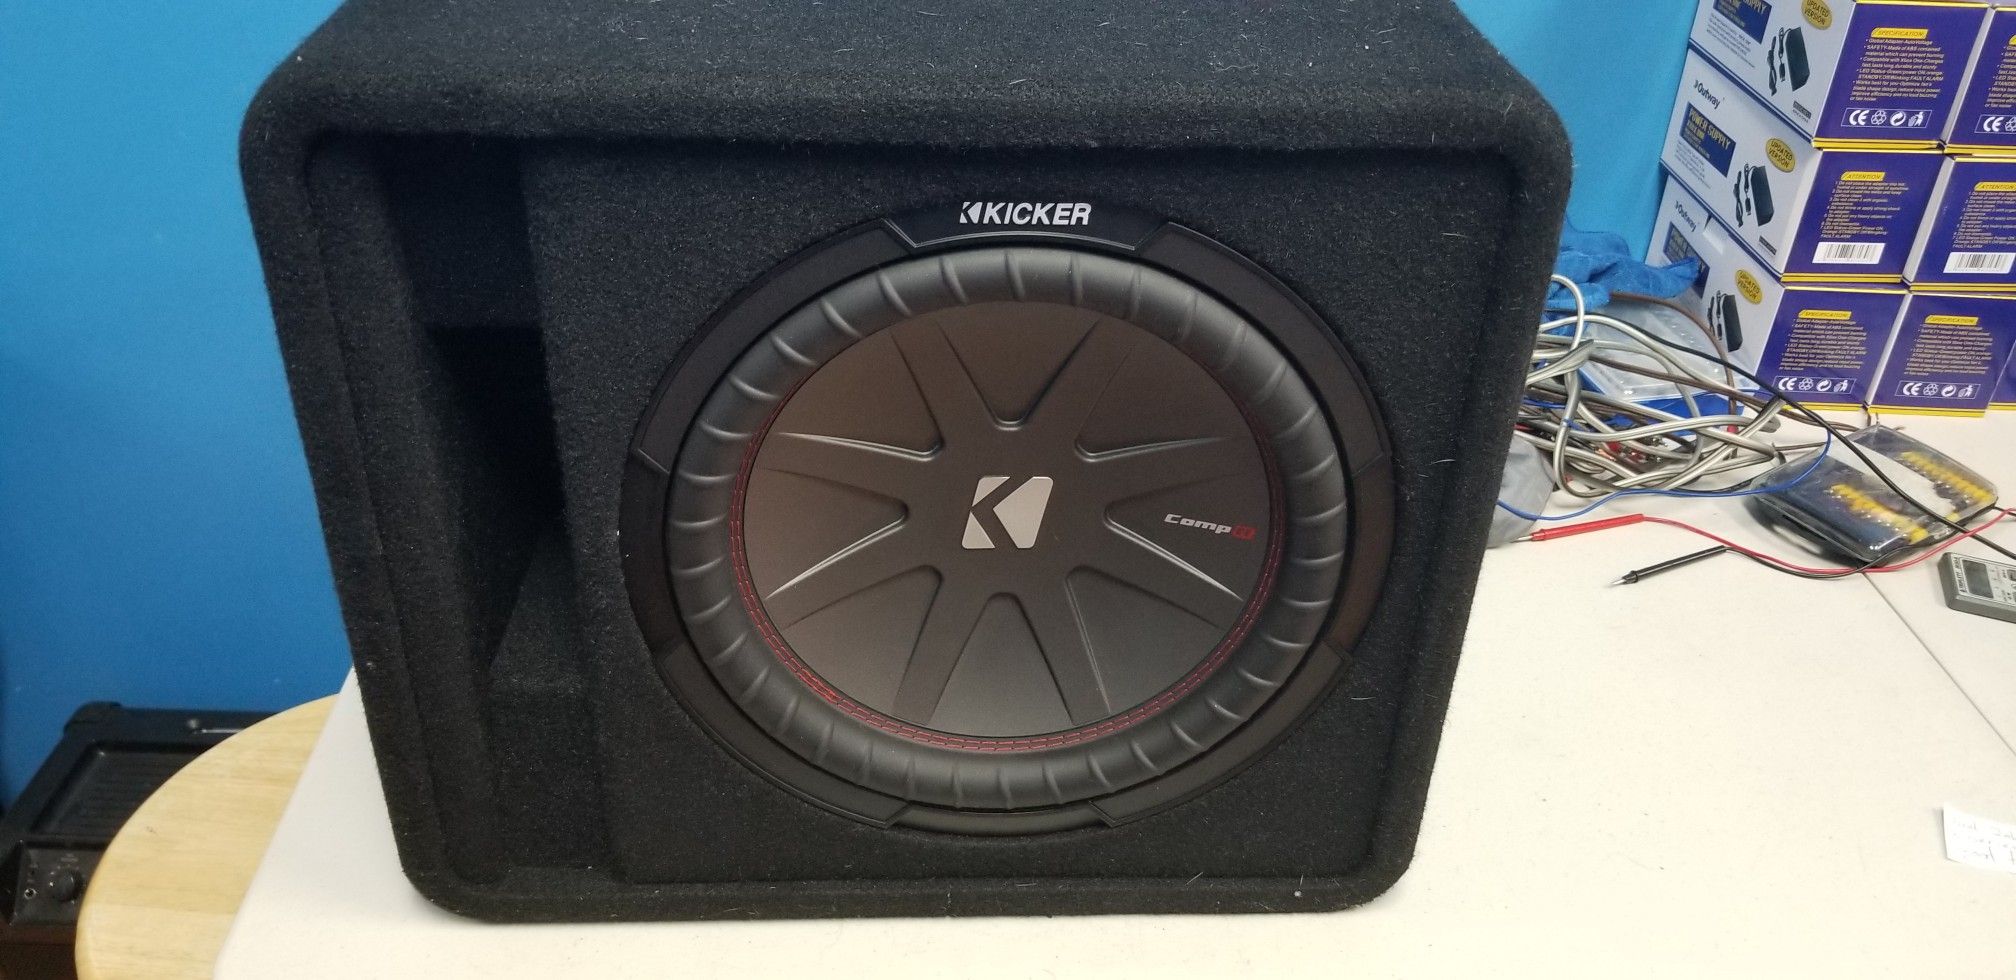 Kicker 12" CompR subwoofer with enclosure. 1000 watts. Sub in like new condition